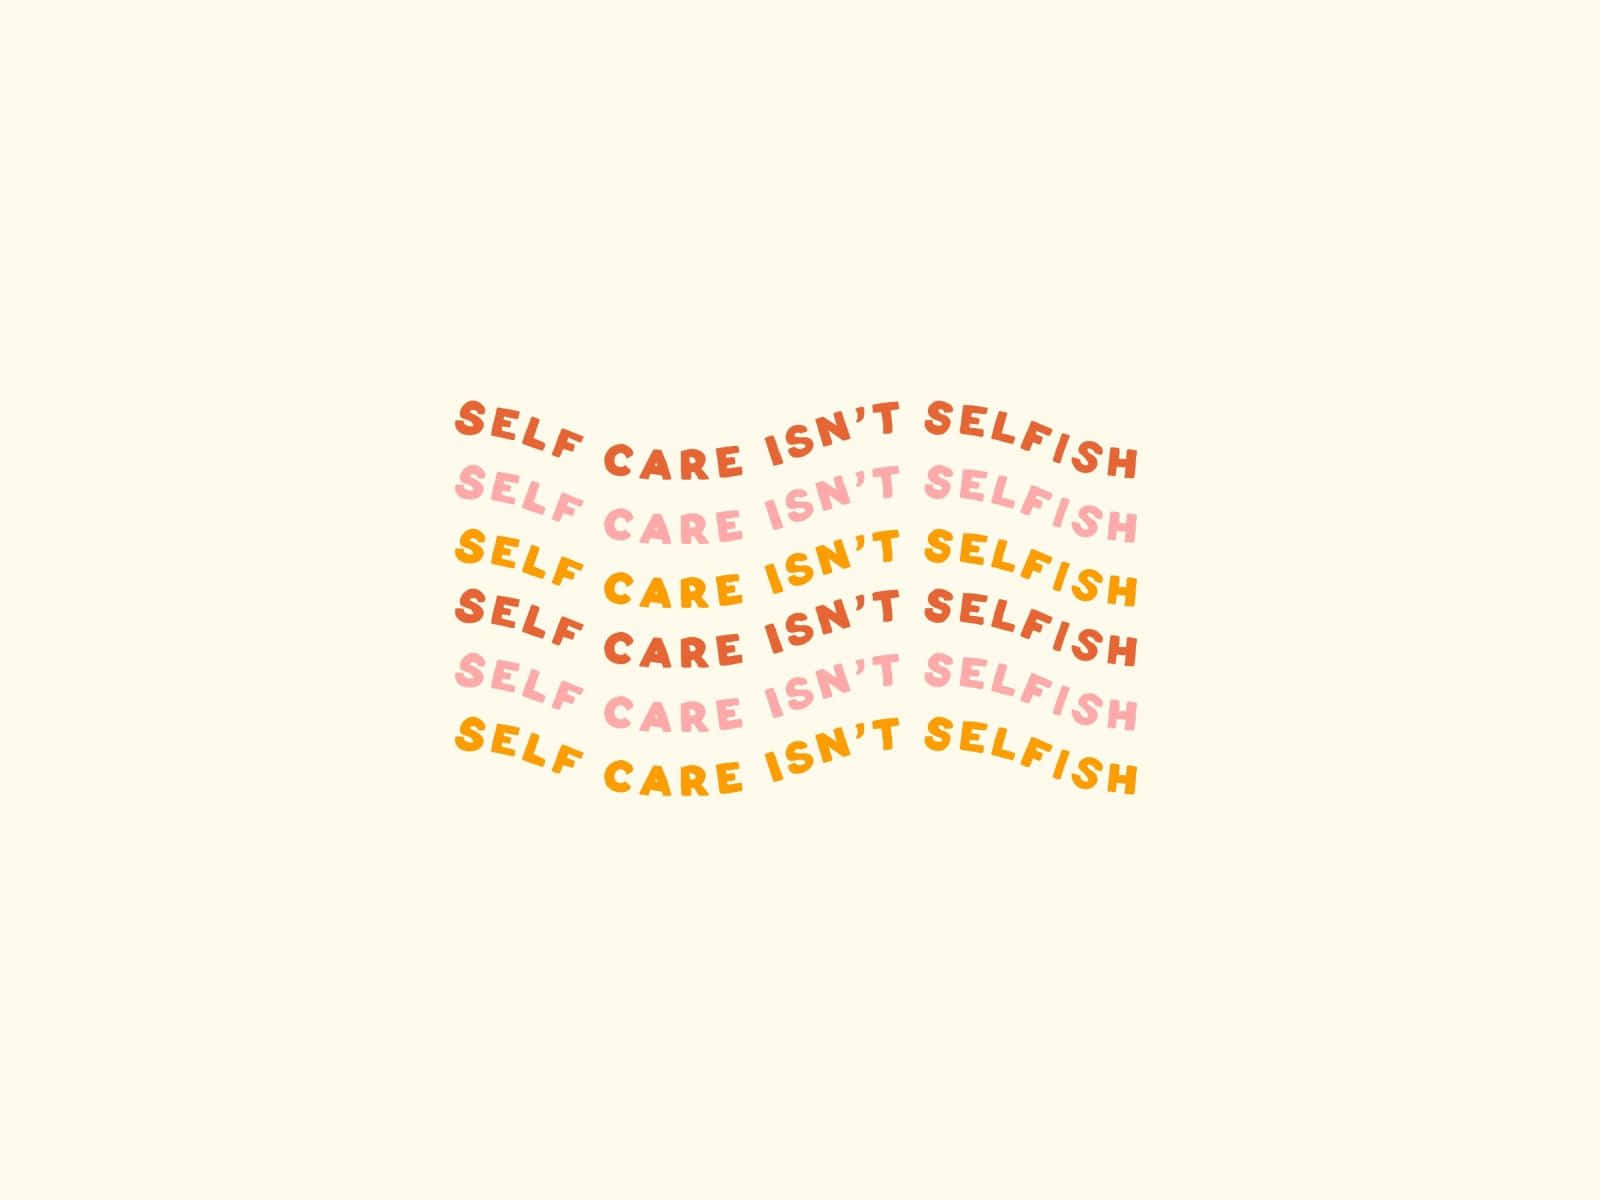 Self care wallpaper i made and thought u guys would appreciate it too   rMacMiller